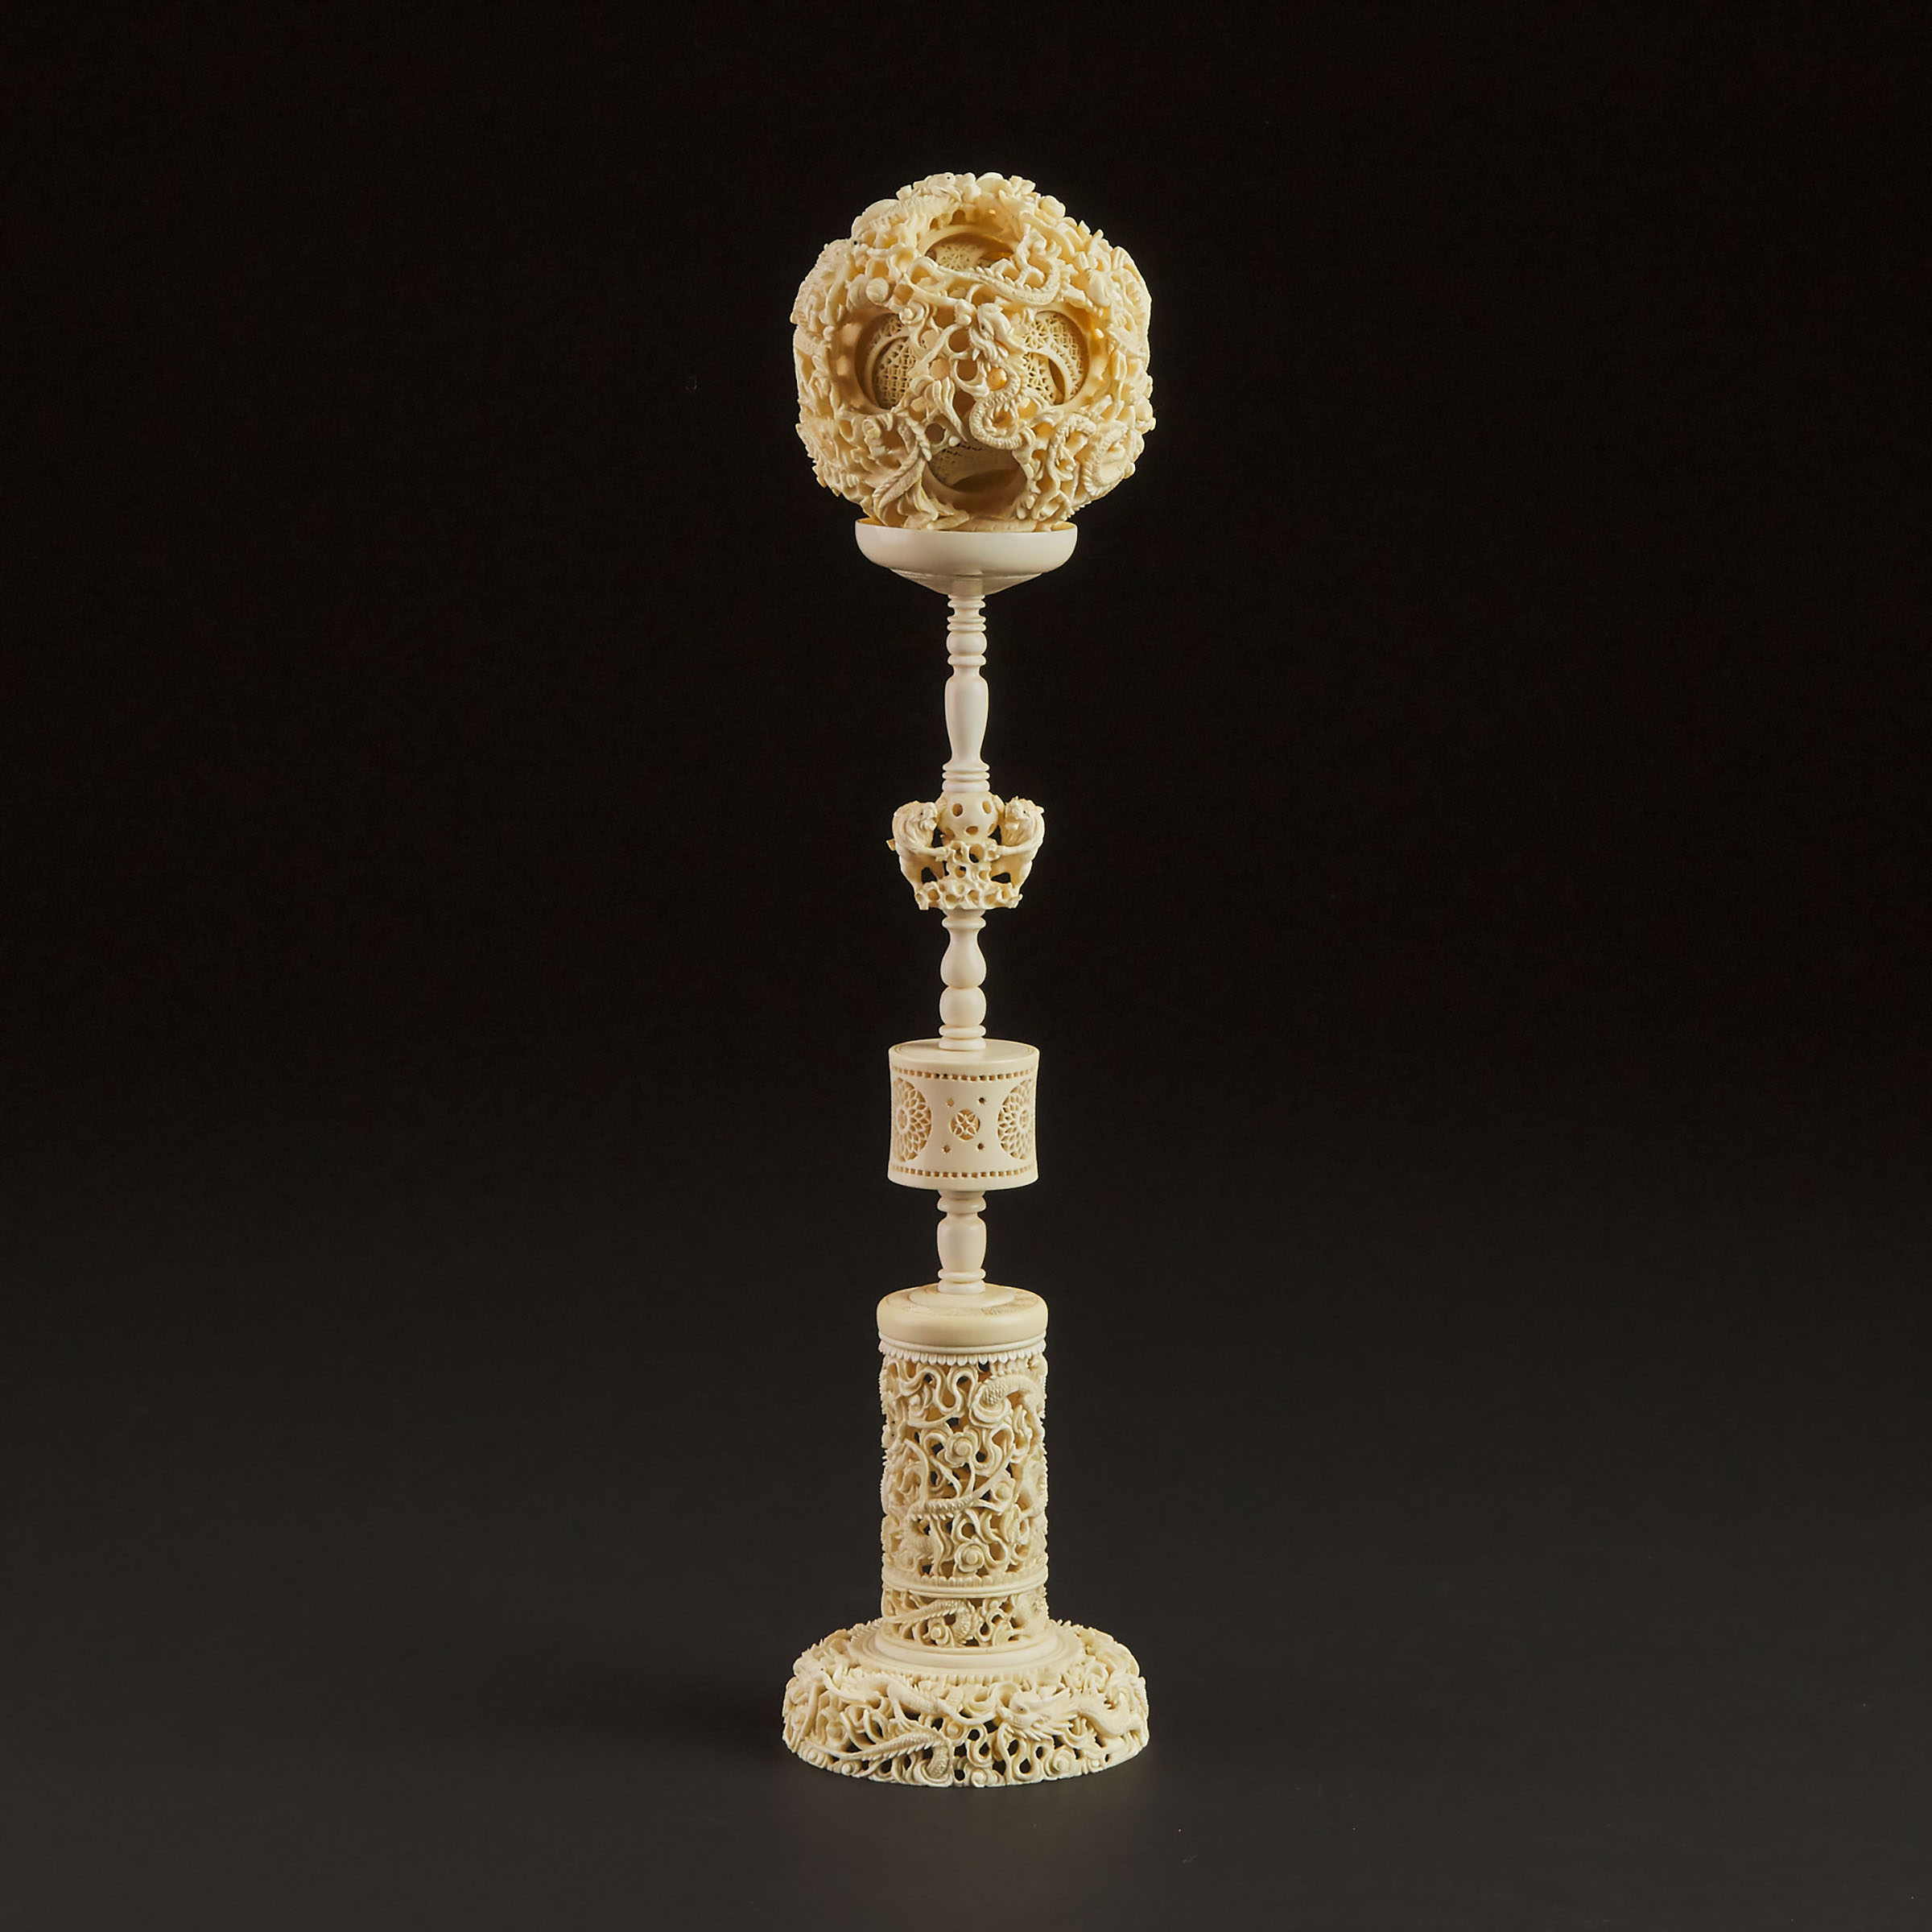 A Large Chinese Ivory Puzzle Ball and Stand, Early 20th Century